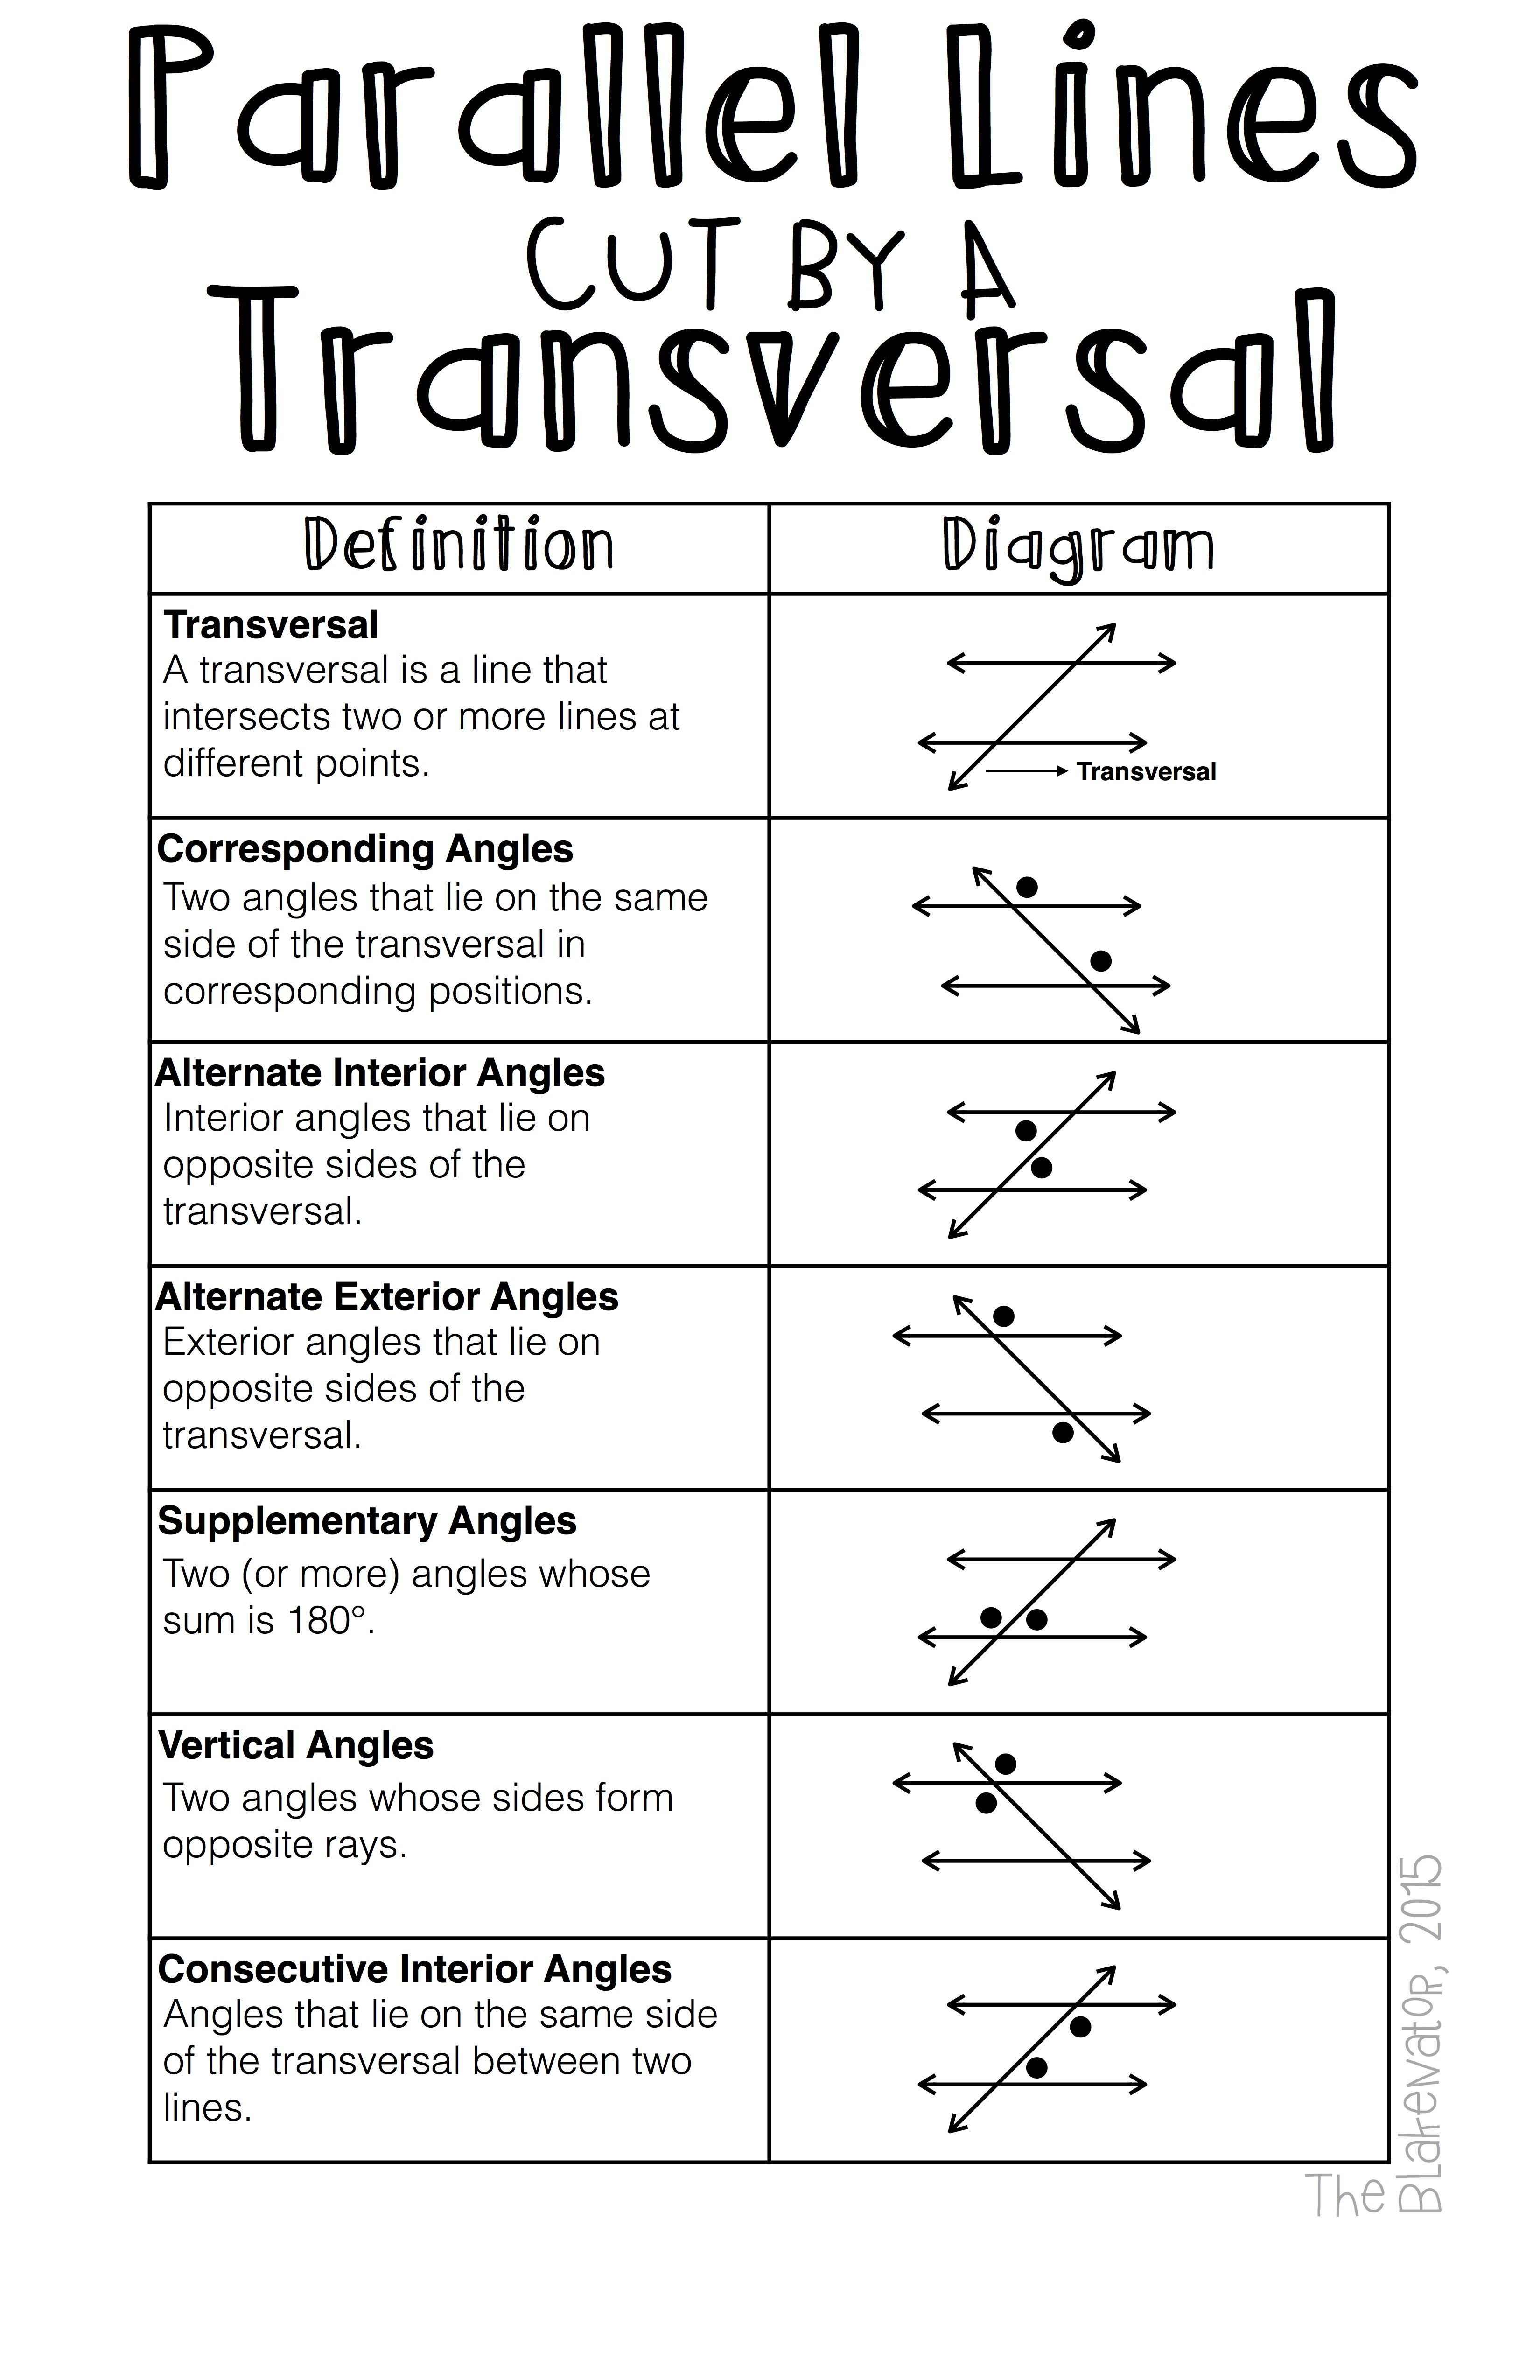 FREE Download! Increase math literacy in your classroom!  Properties of Parallel Lines Cut by Transver